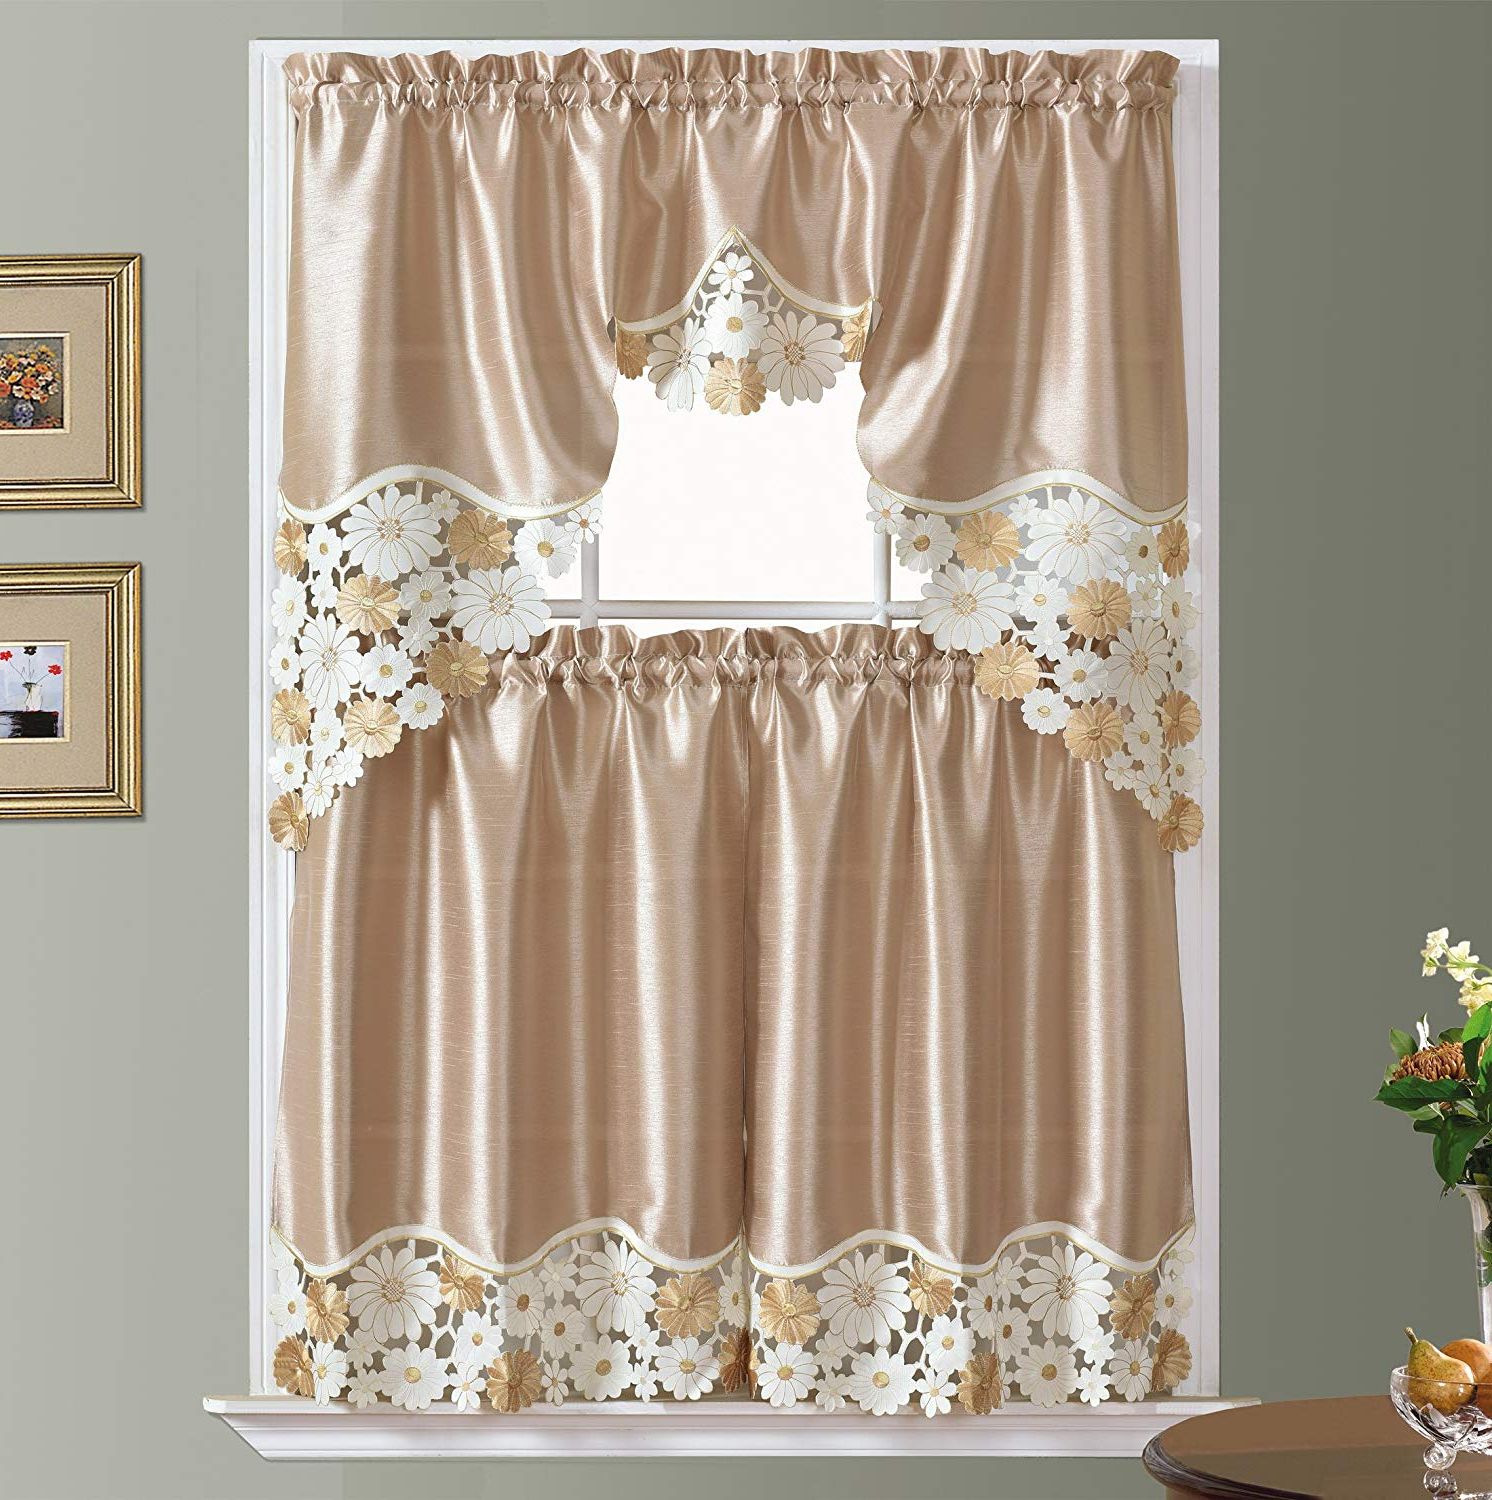 Gohd Golden Ocean Home Decor Spring Vigor Kitchen Curtain Set/swag Valance  & Tier Set. Nice Matching Color Daisy Embroidery On Border With Cutworks Intended For Well Known Spring Daisy Tiered Curtain 3 Piece Sets (Photo 7 of 20)